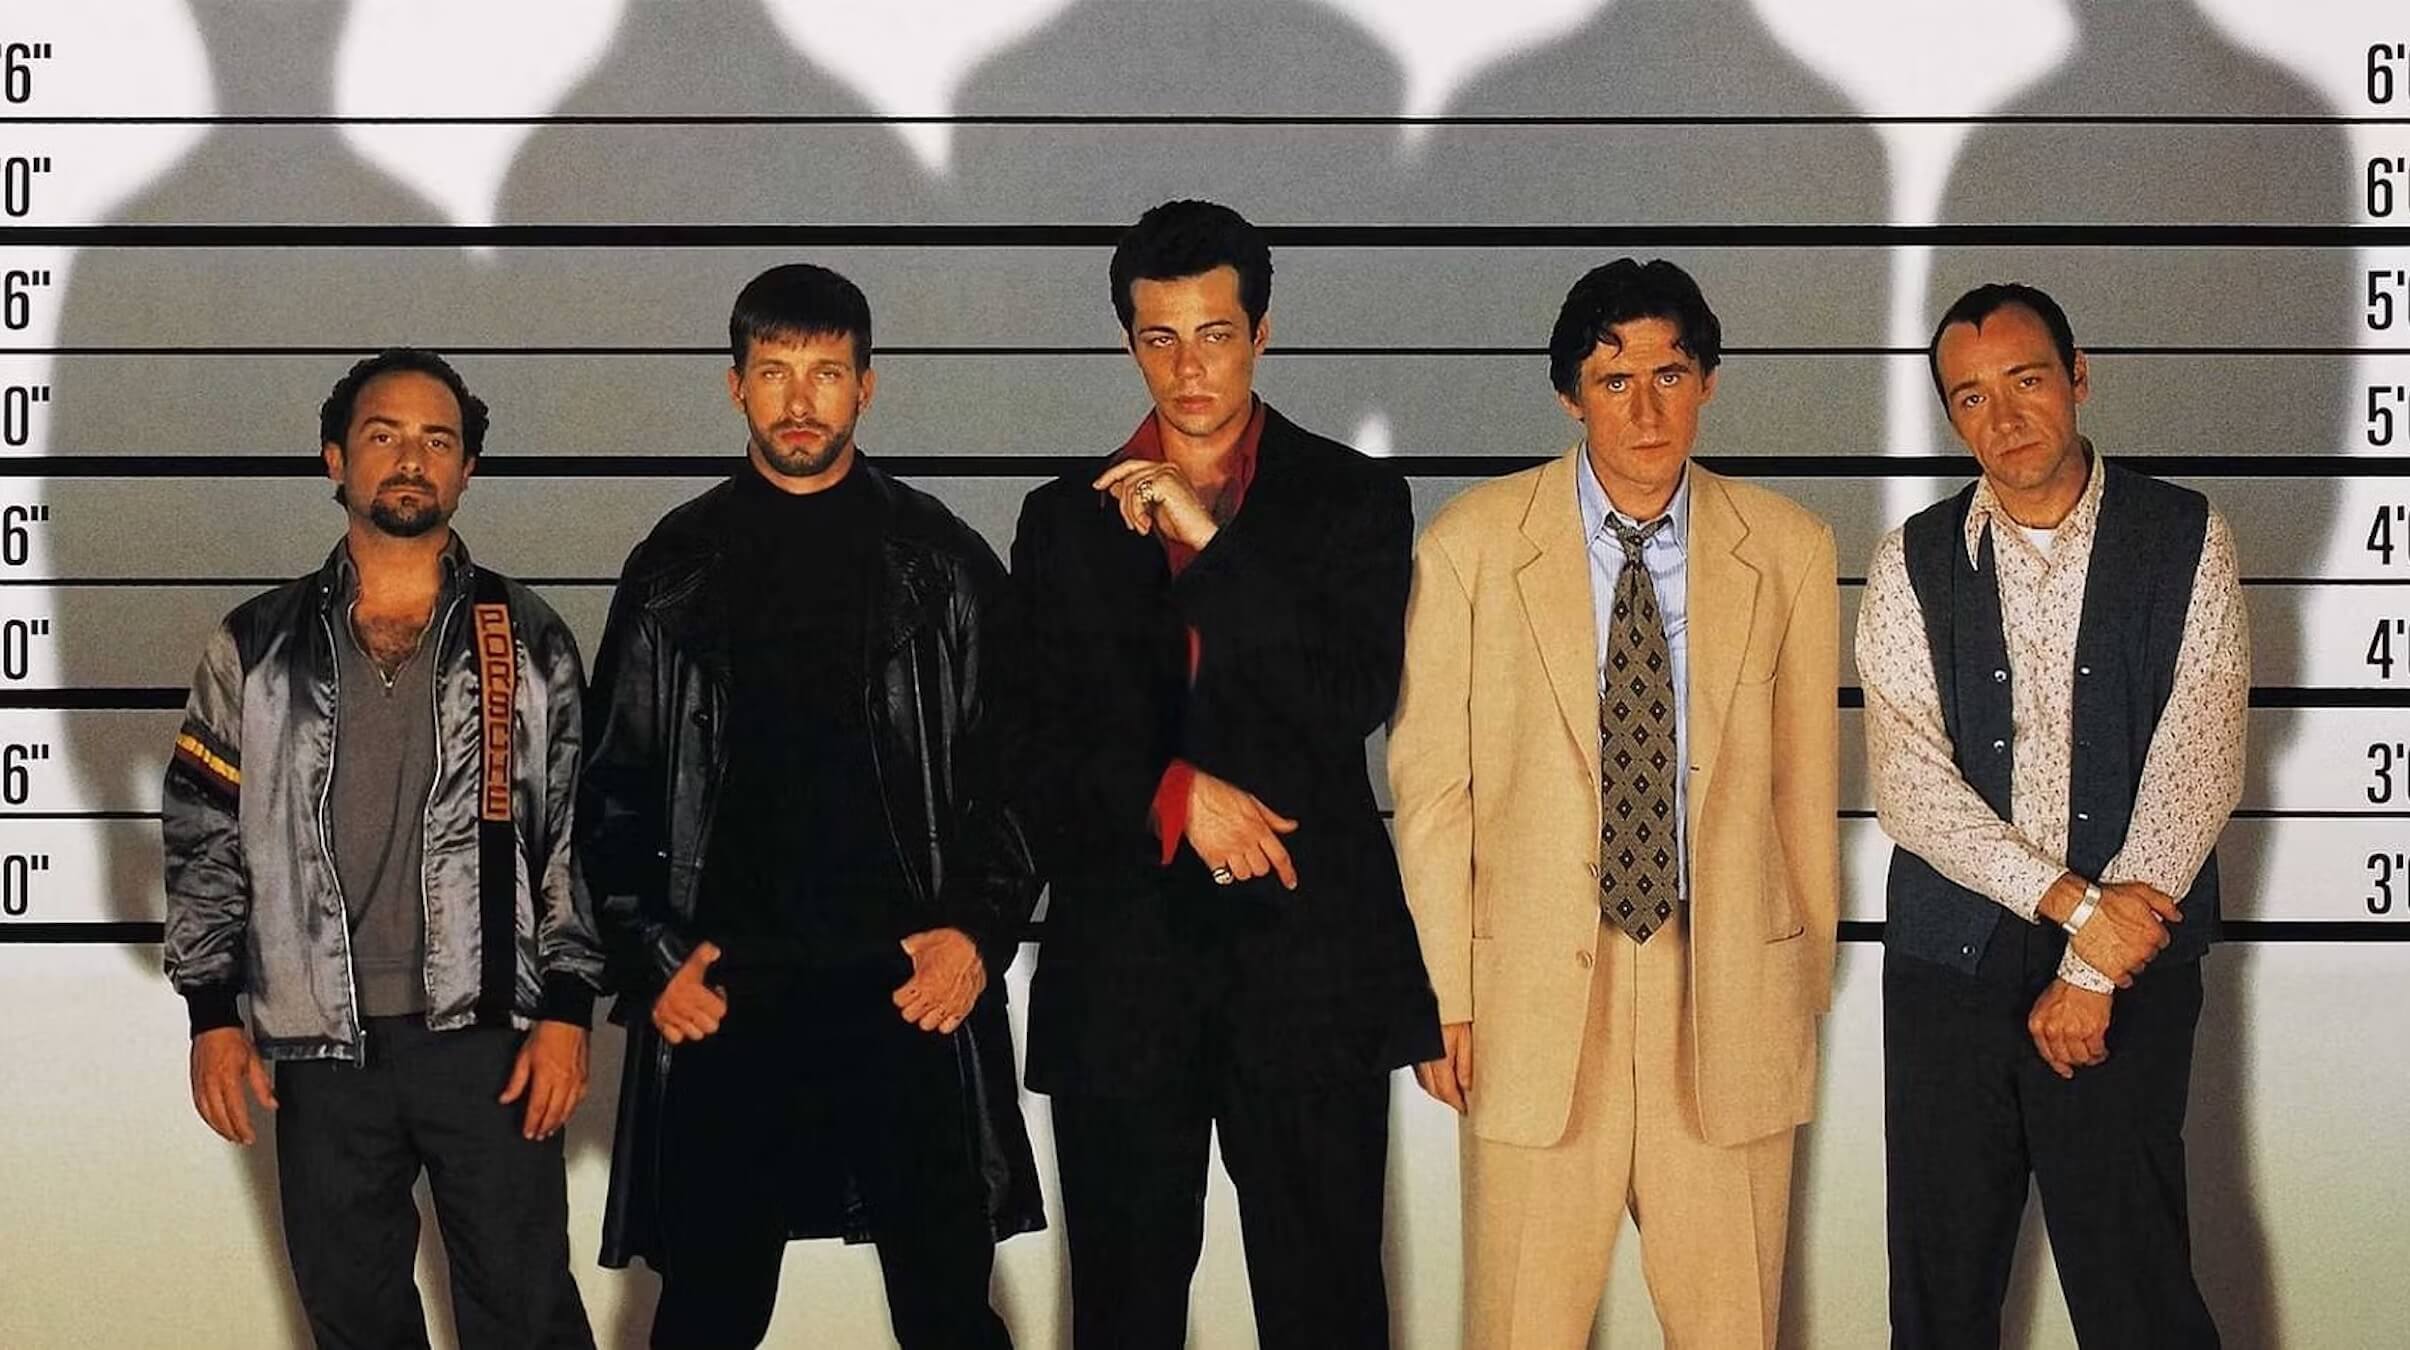 The cast of 'The Usual Suspects' standing against a wall with measurements; The Dark Side of Cinema: Uncover the Masterpieces of Film Noir